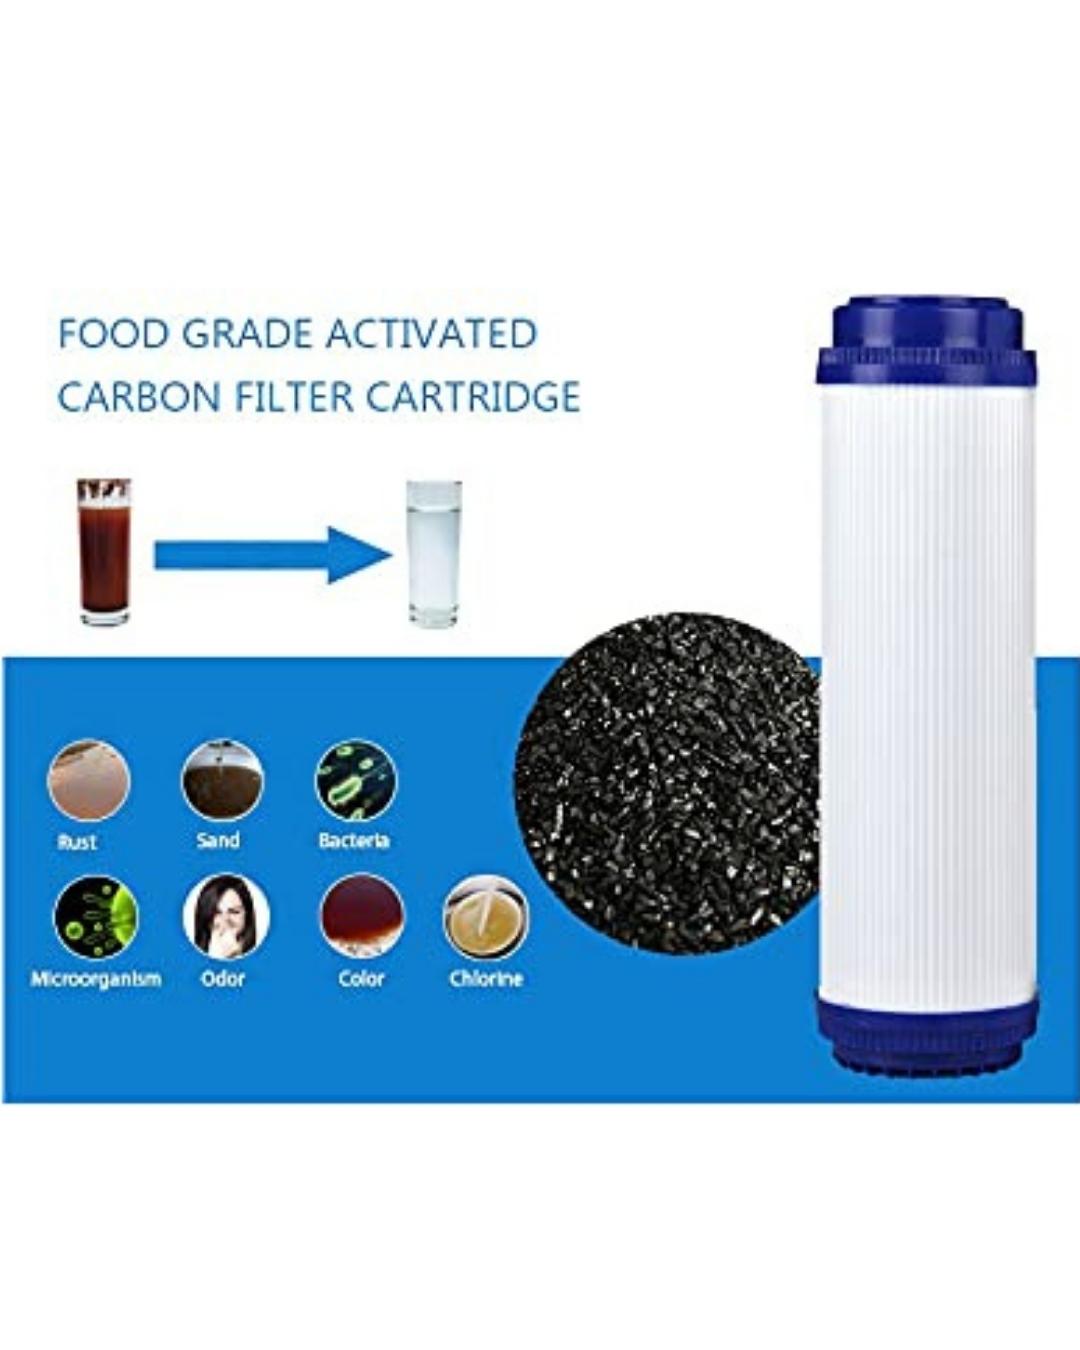 3-Stage Whole House Water Filtration System: 20" Big Blue (with 5 Micron Sediment, Carbon Block, and Iron & Lead Reducing Filter)